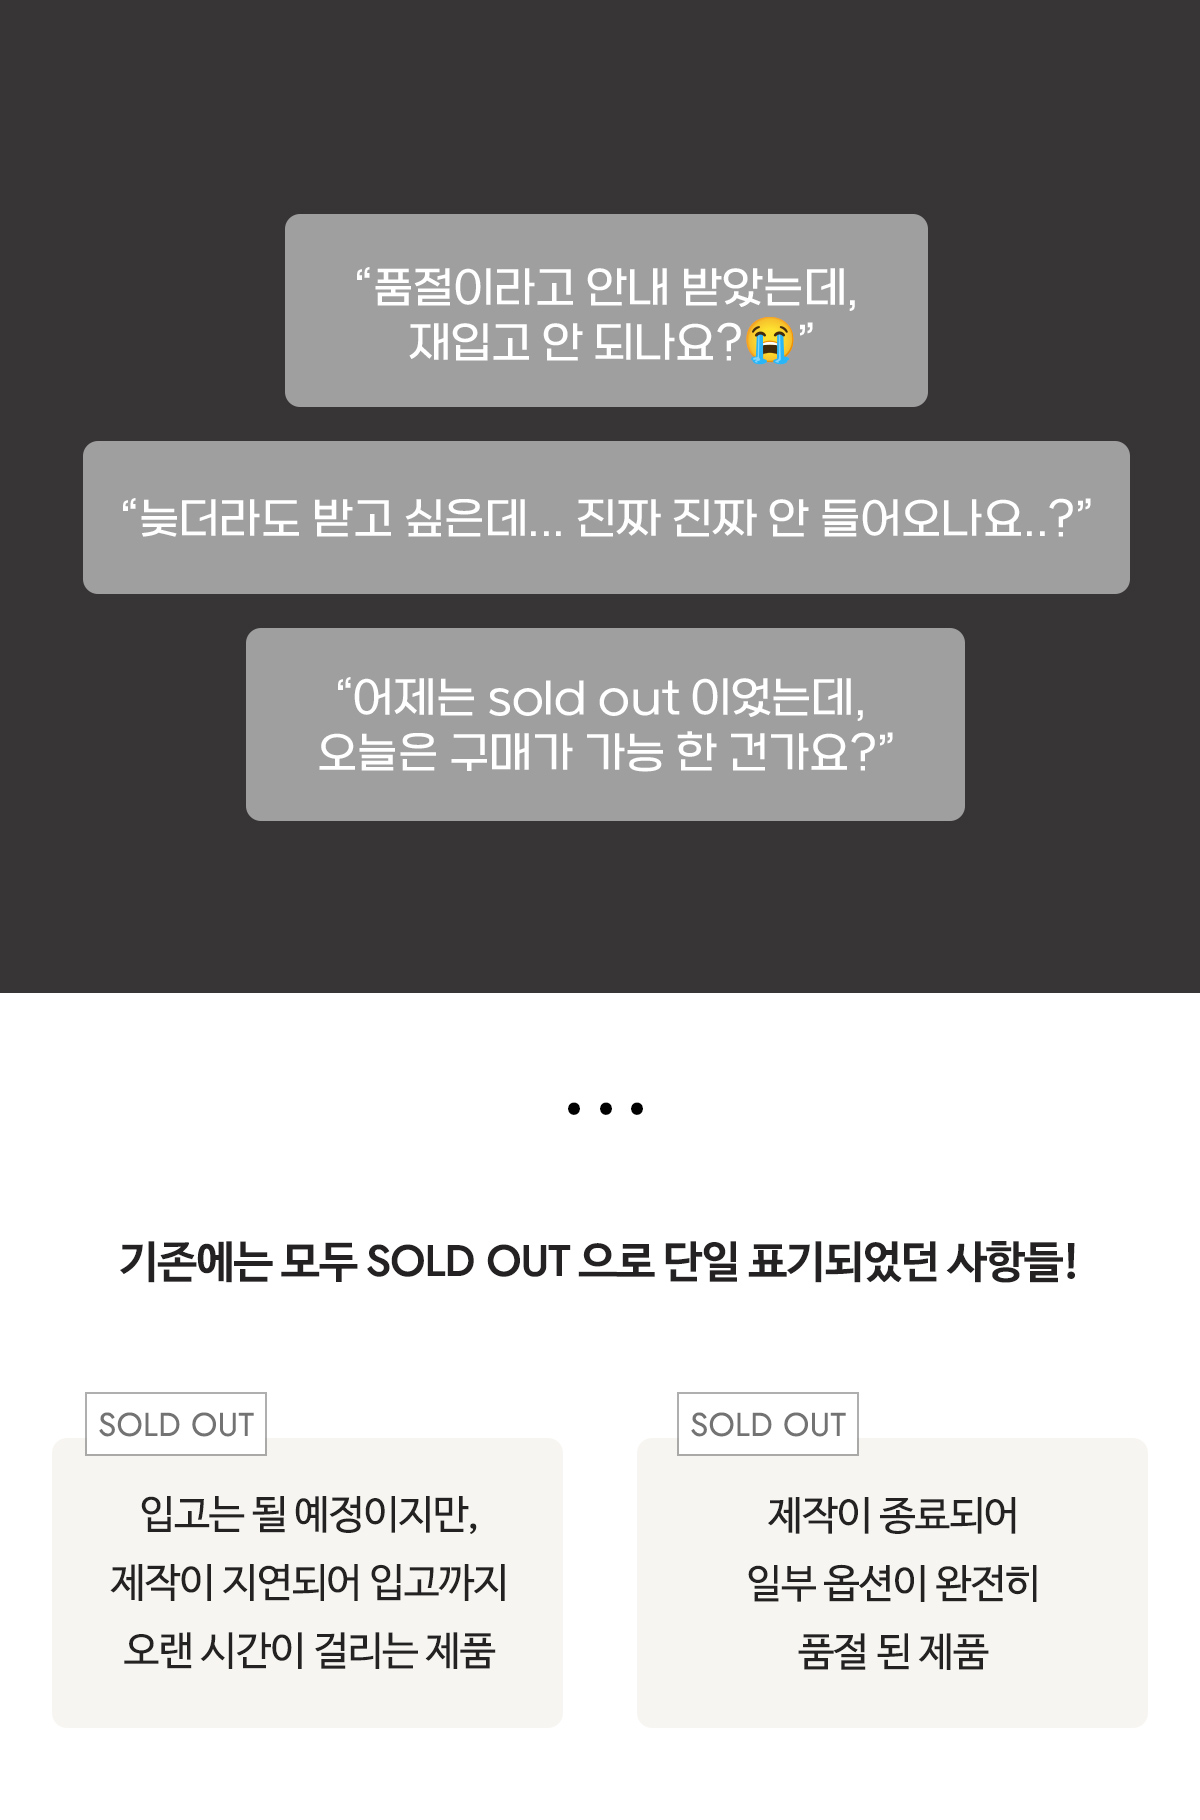 [2020] Sold out / 재입고 예정 분류